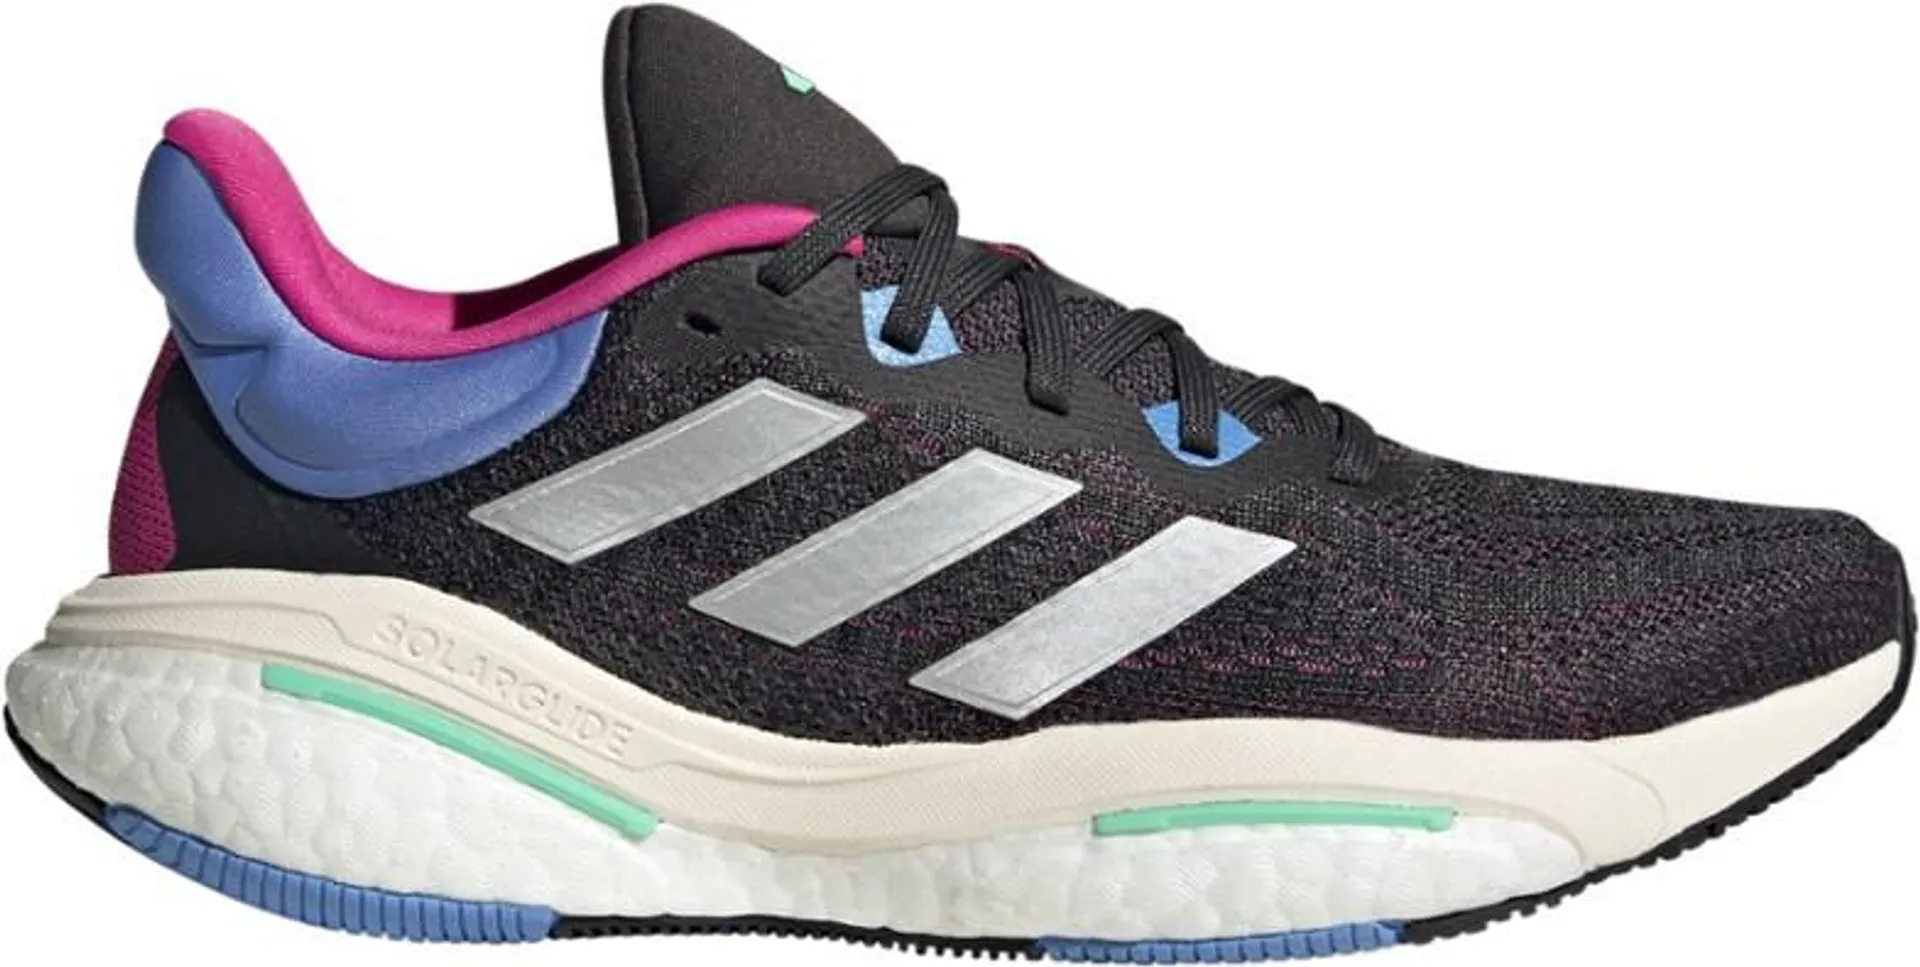 adidas Solarglide 6 Road-Running Shoes - Women's